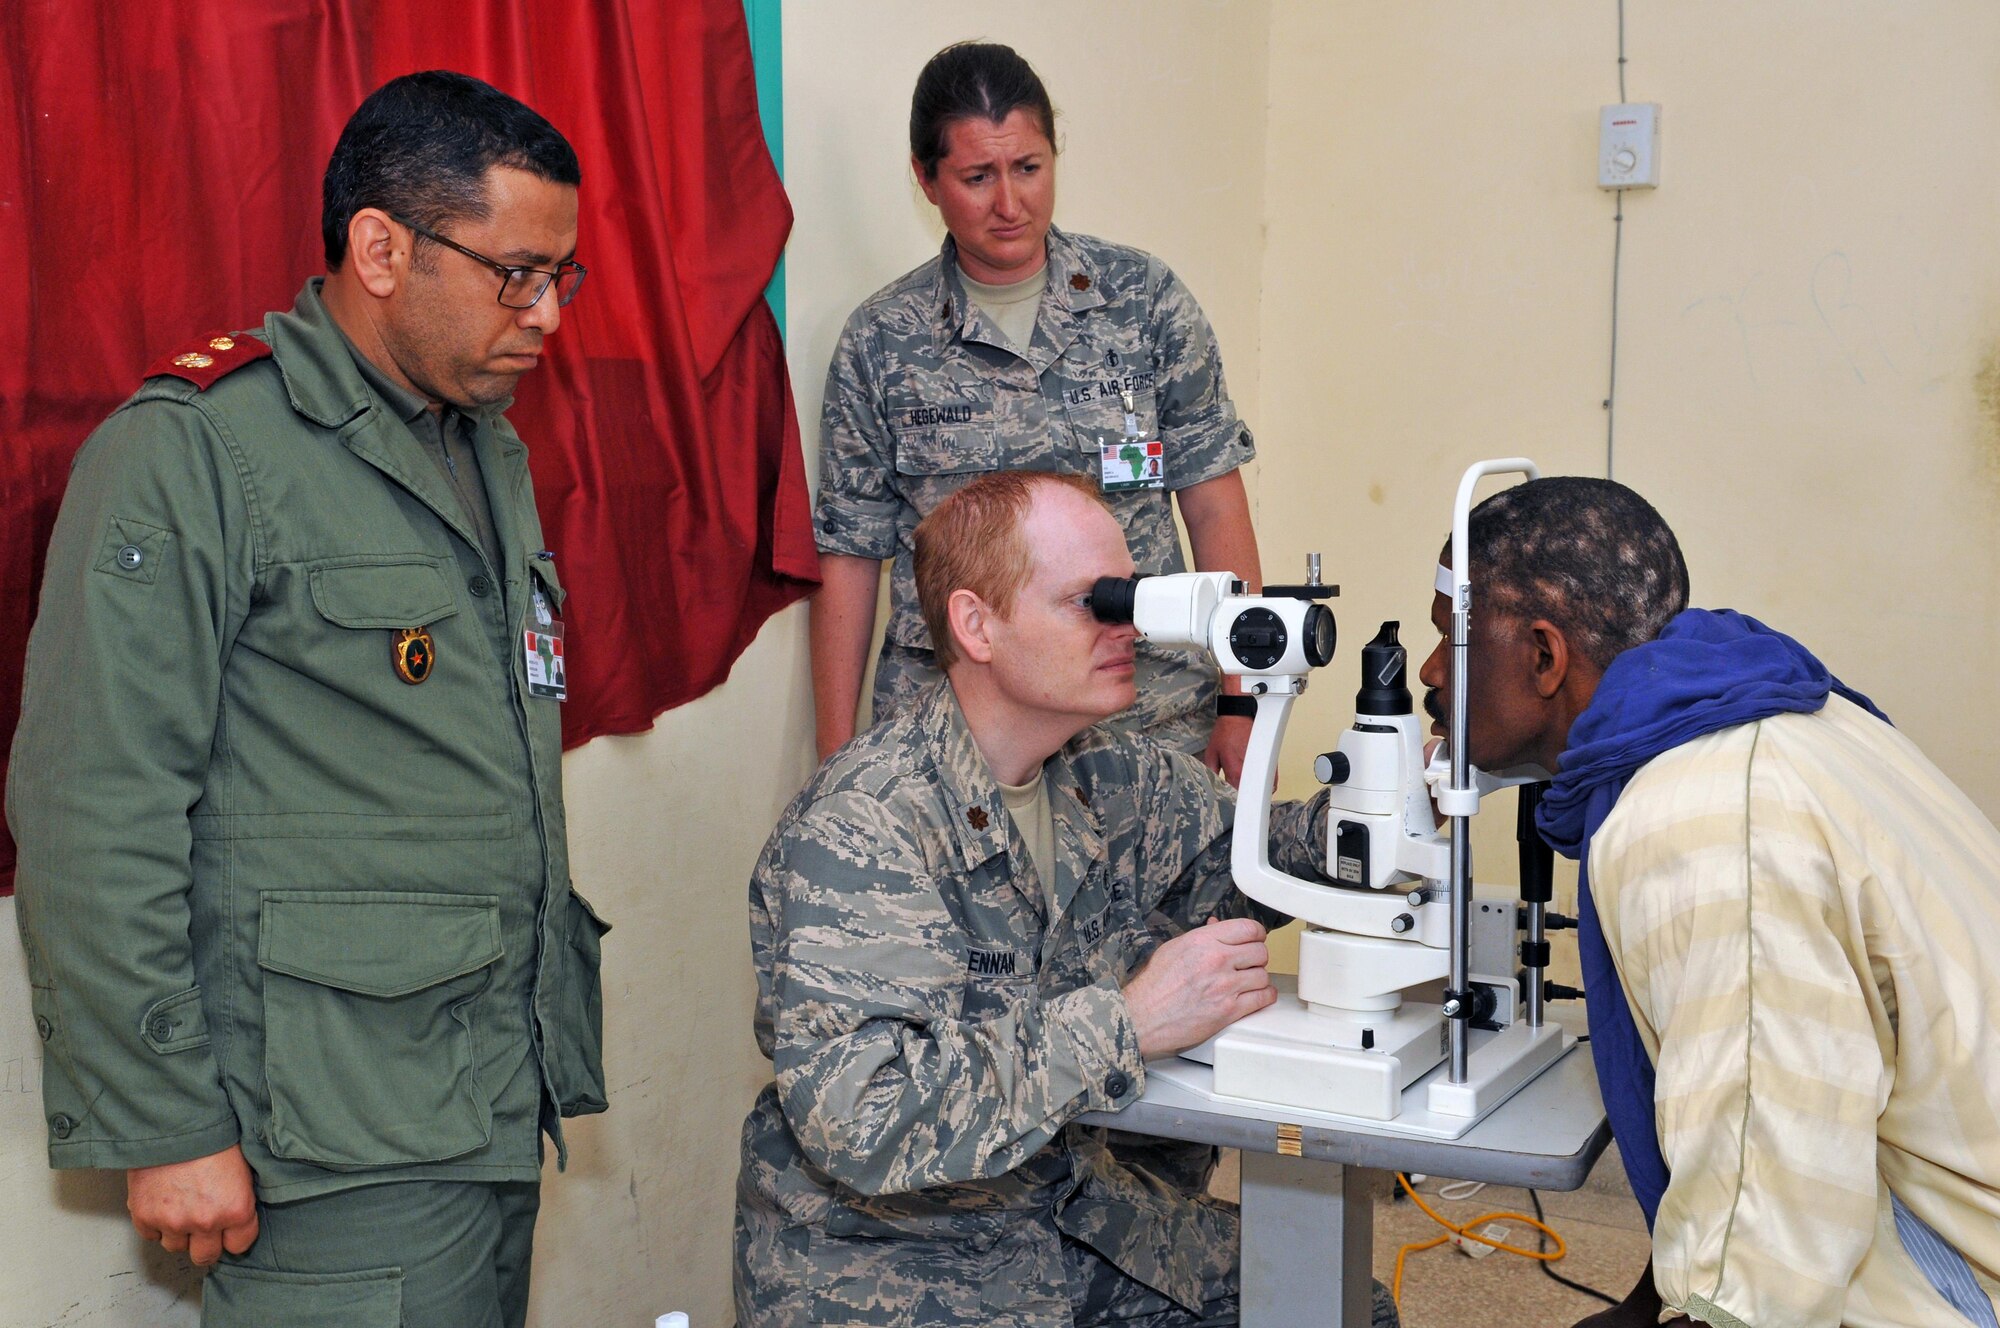 Maj. Kirk Drennan, an optometrist with the 151st Medical Group and Maj. Jessica Hegewald, an optometrist with the 140th Medical Group, provide medical care in Adis, Morocco on April 22, 2017. (U.S. Air National Guard photo by Tech. Sgt. Annie Edwards)